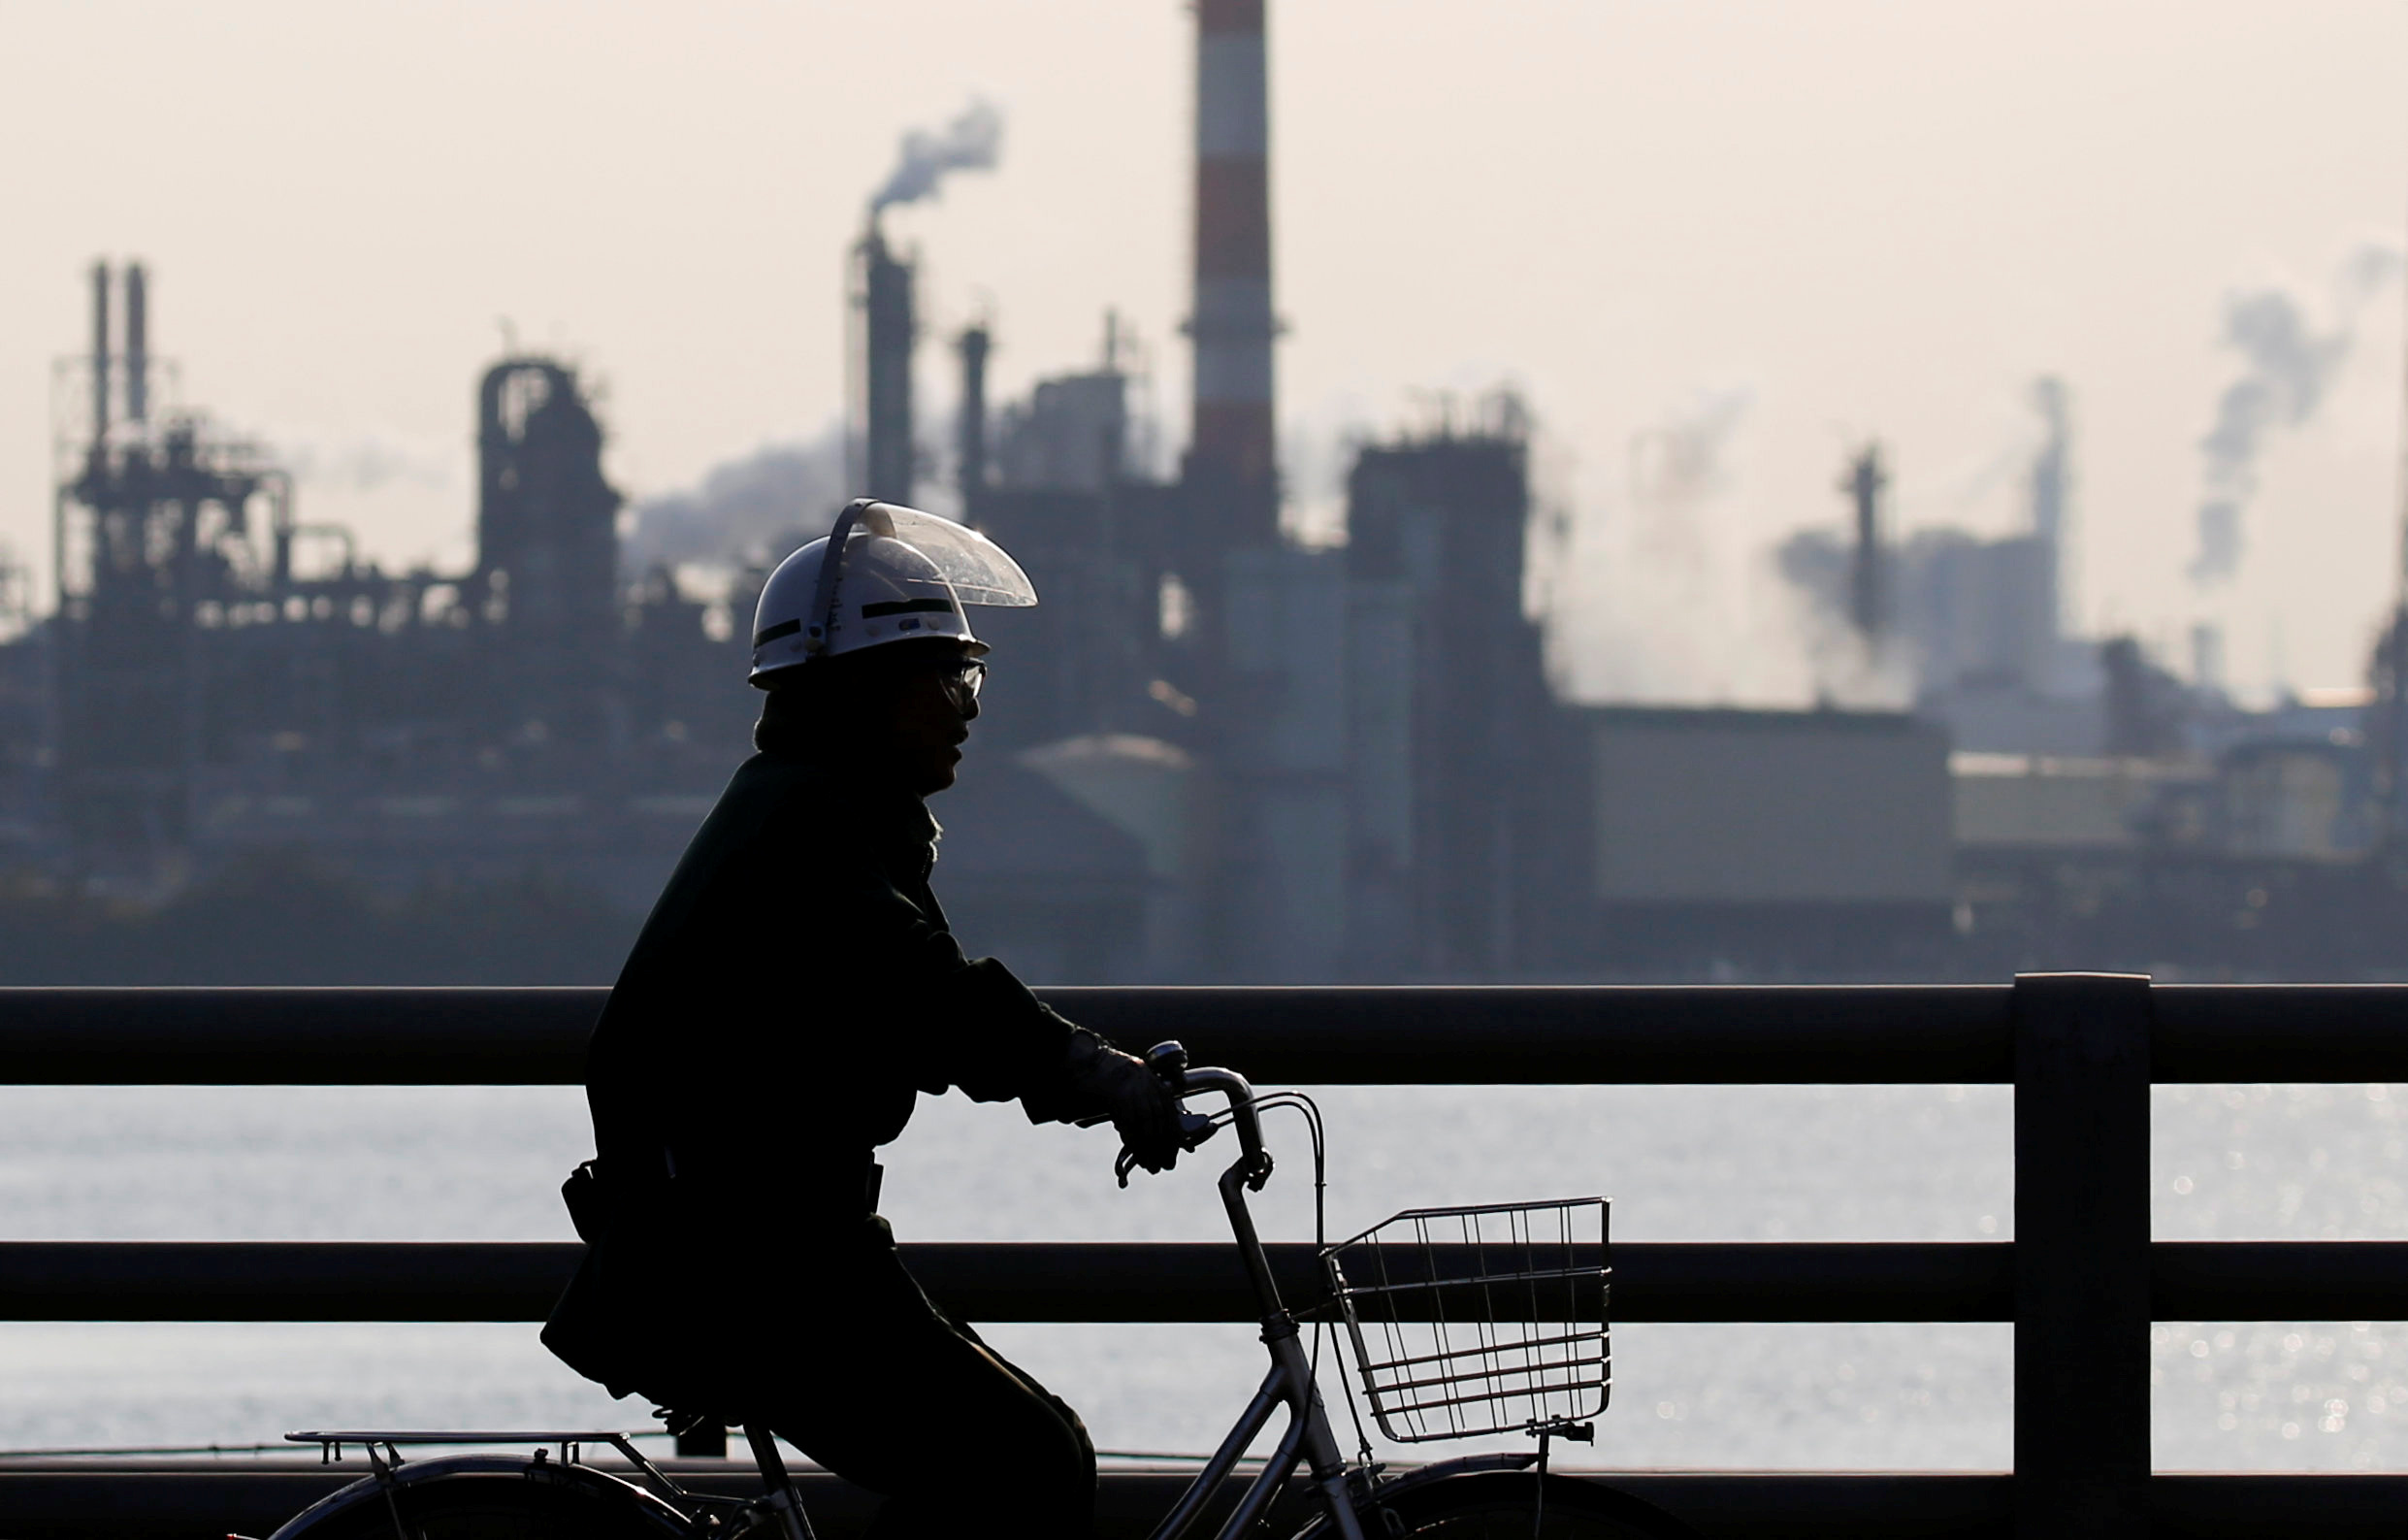 A worker cycles near a factory at the Keihin industrial zone in Kawasaki, Japan